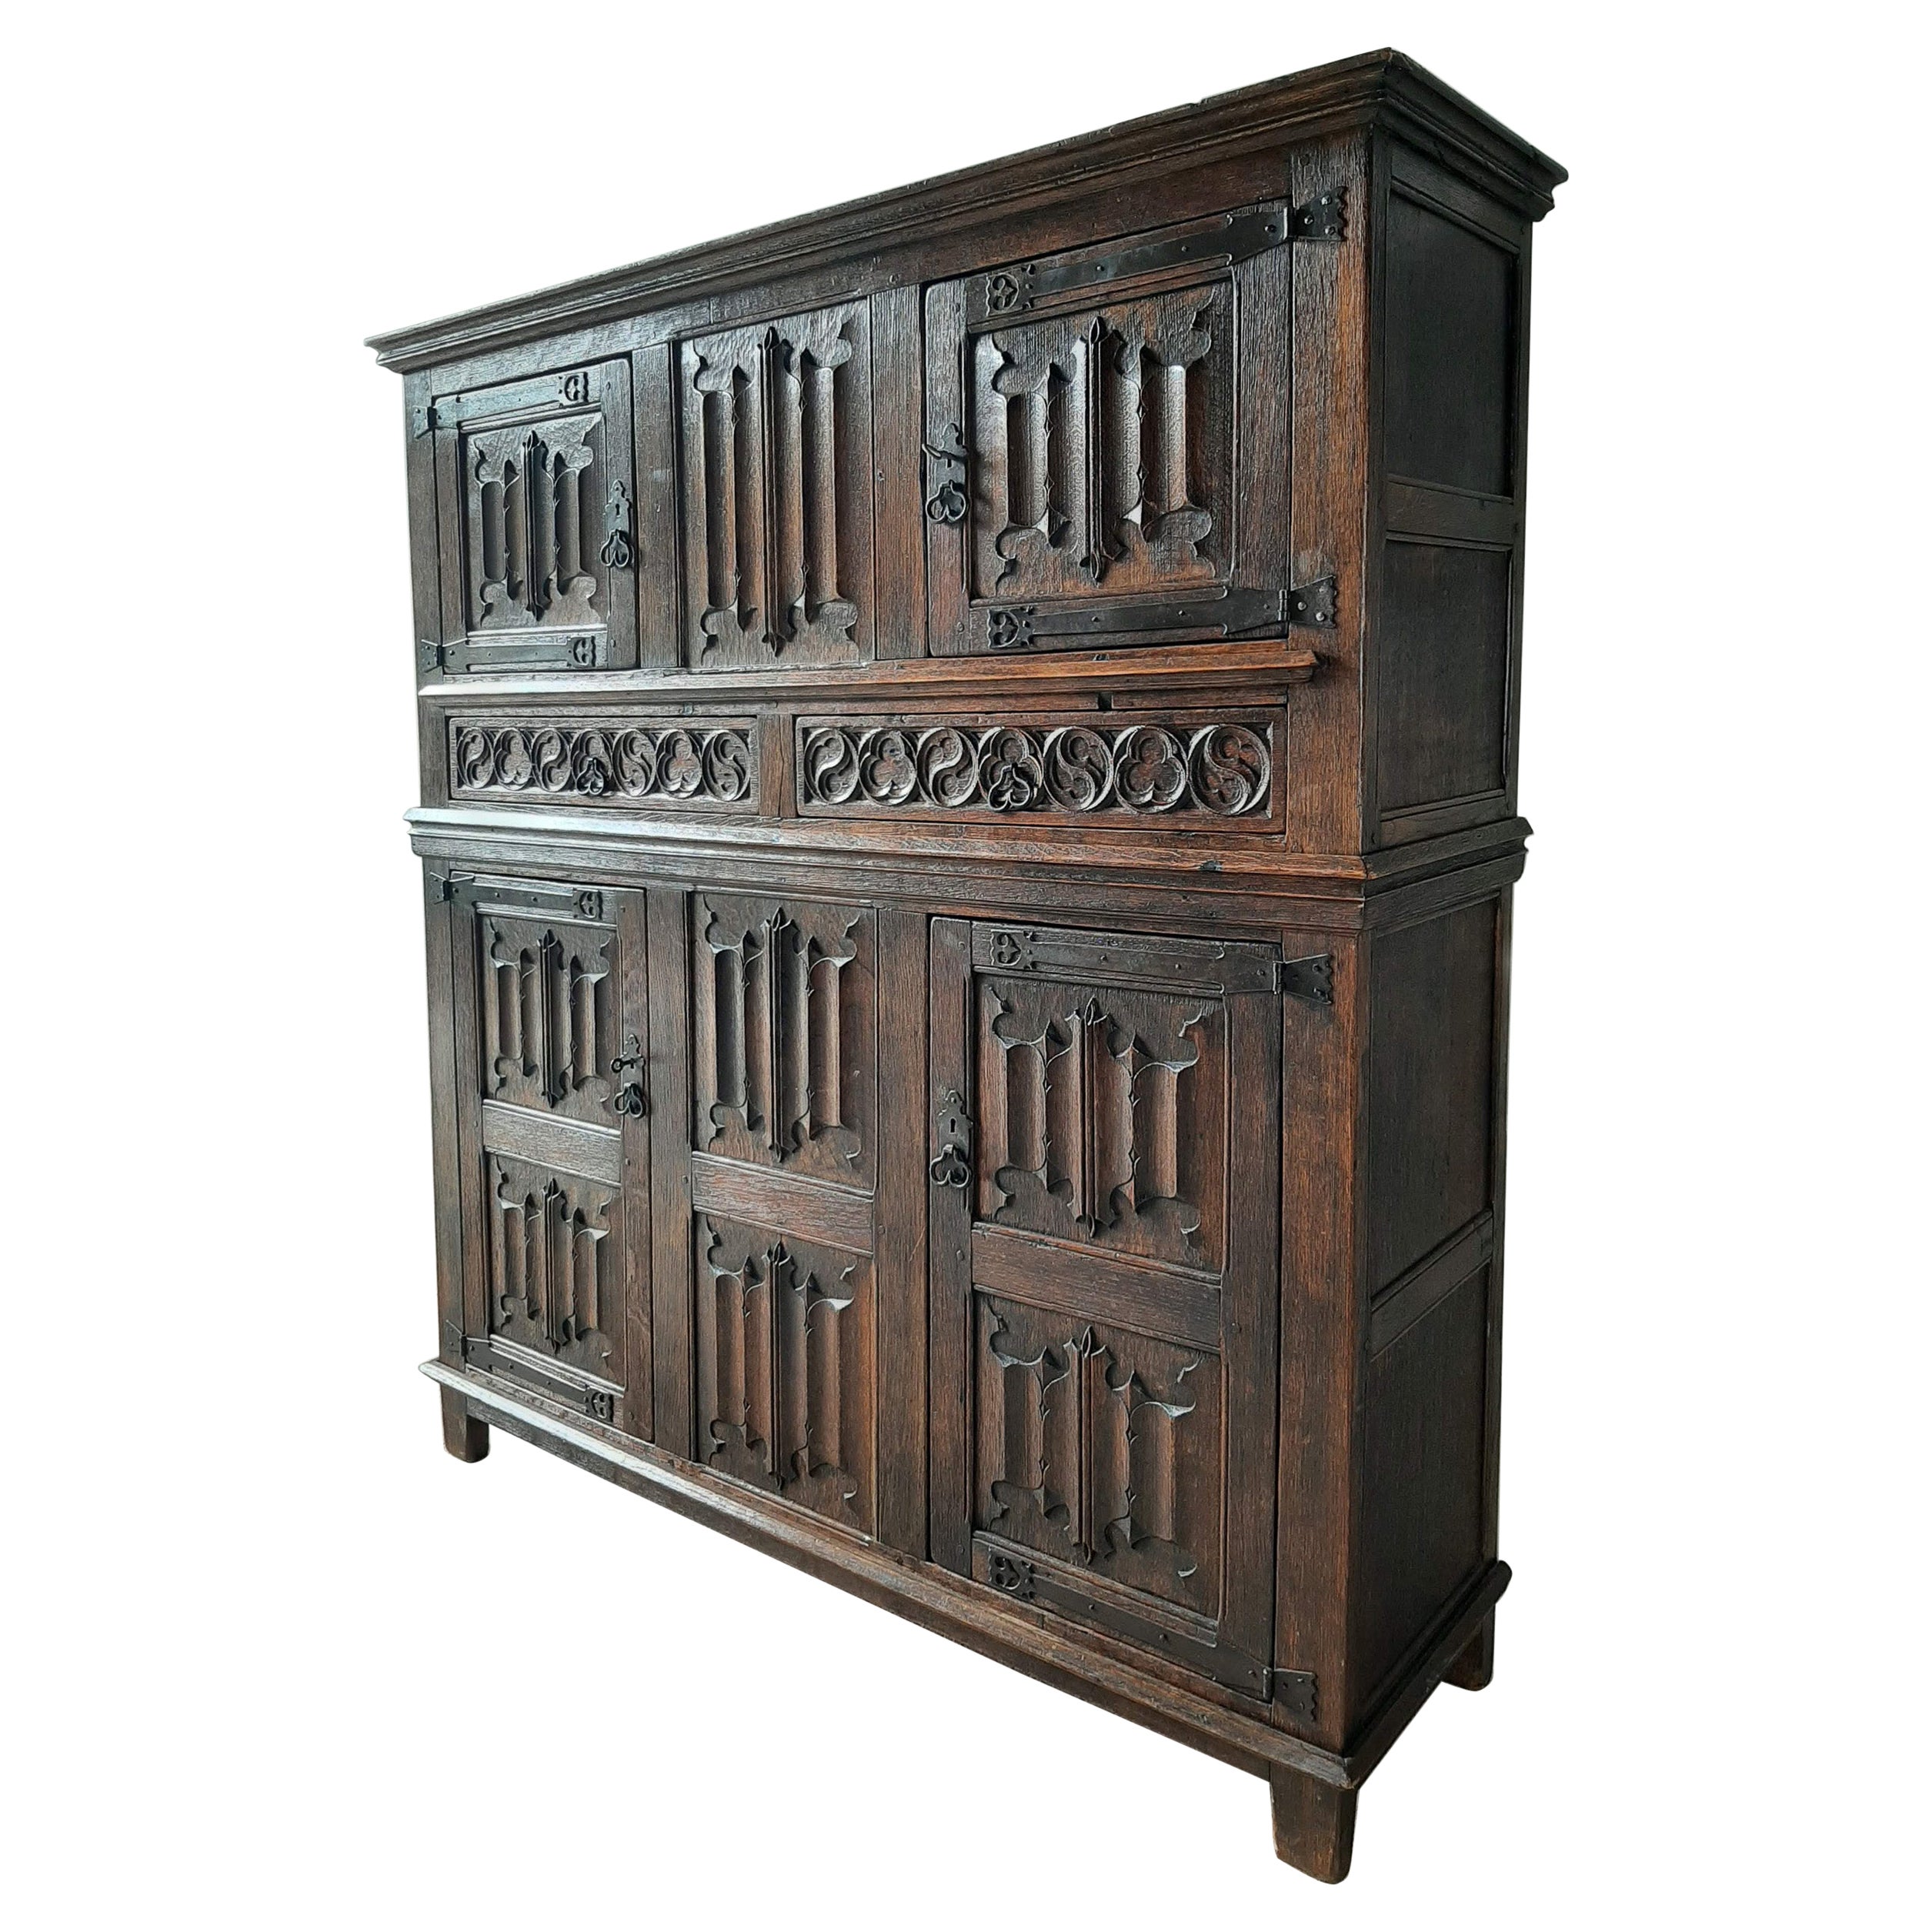 Amazing Gothic Revival High Credenza with Hand Carved Church Windows Early 1900s